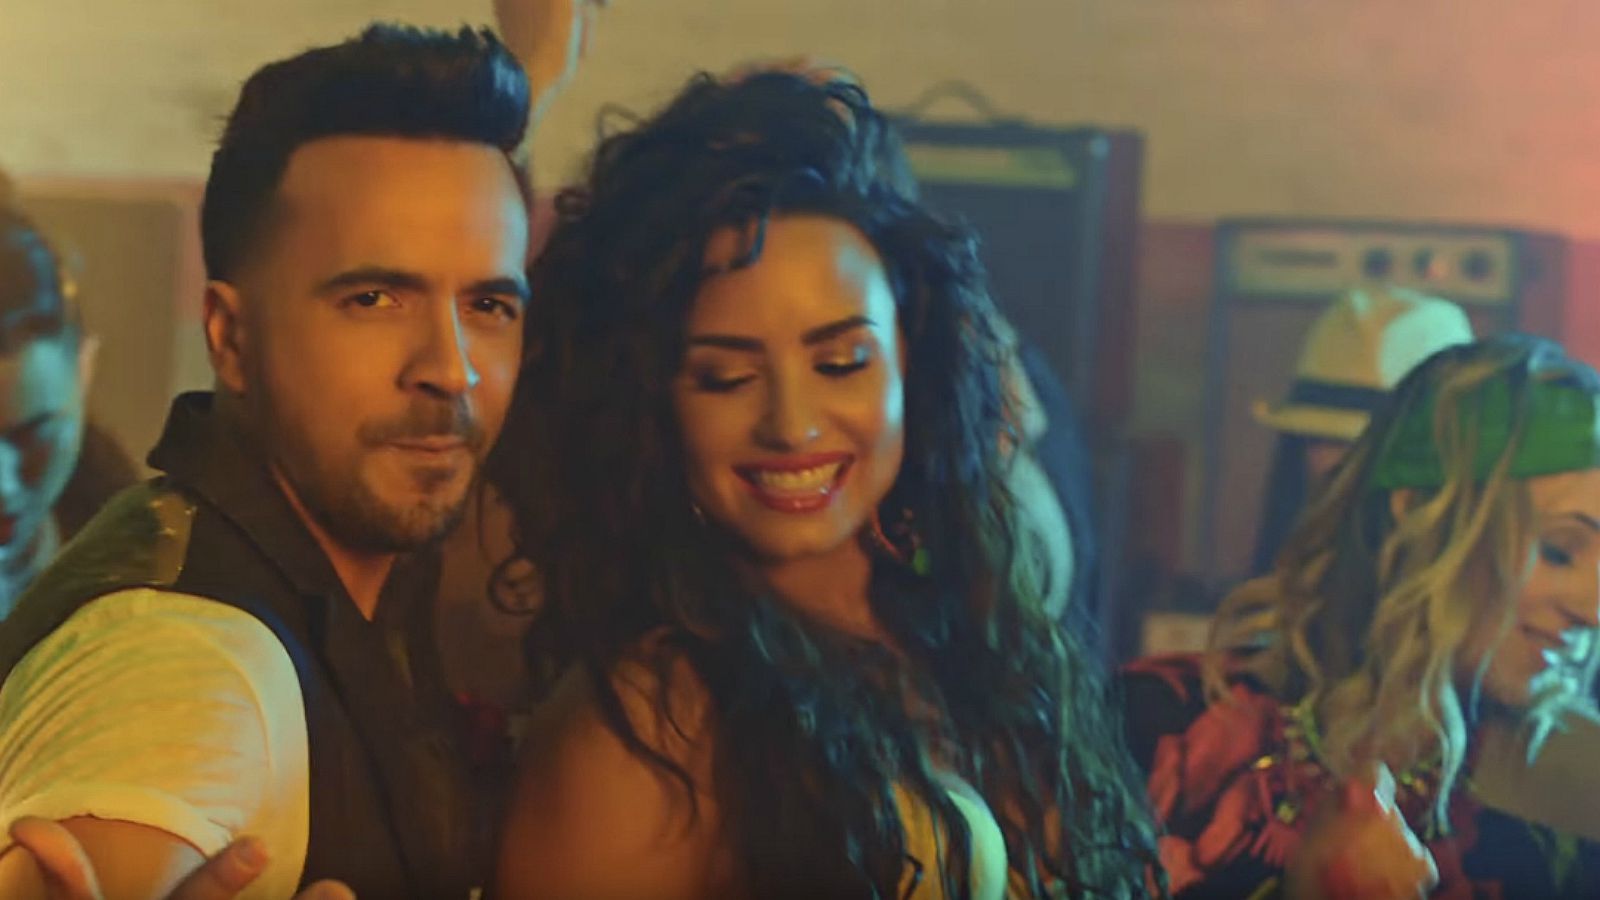 2017’s ‘Despacito’ Is the Most Streamed Song of All Time. Luis Fonsi’s Next Hit May Even Surpass It!